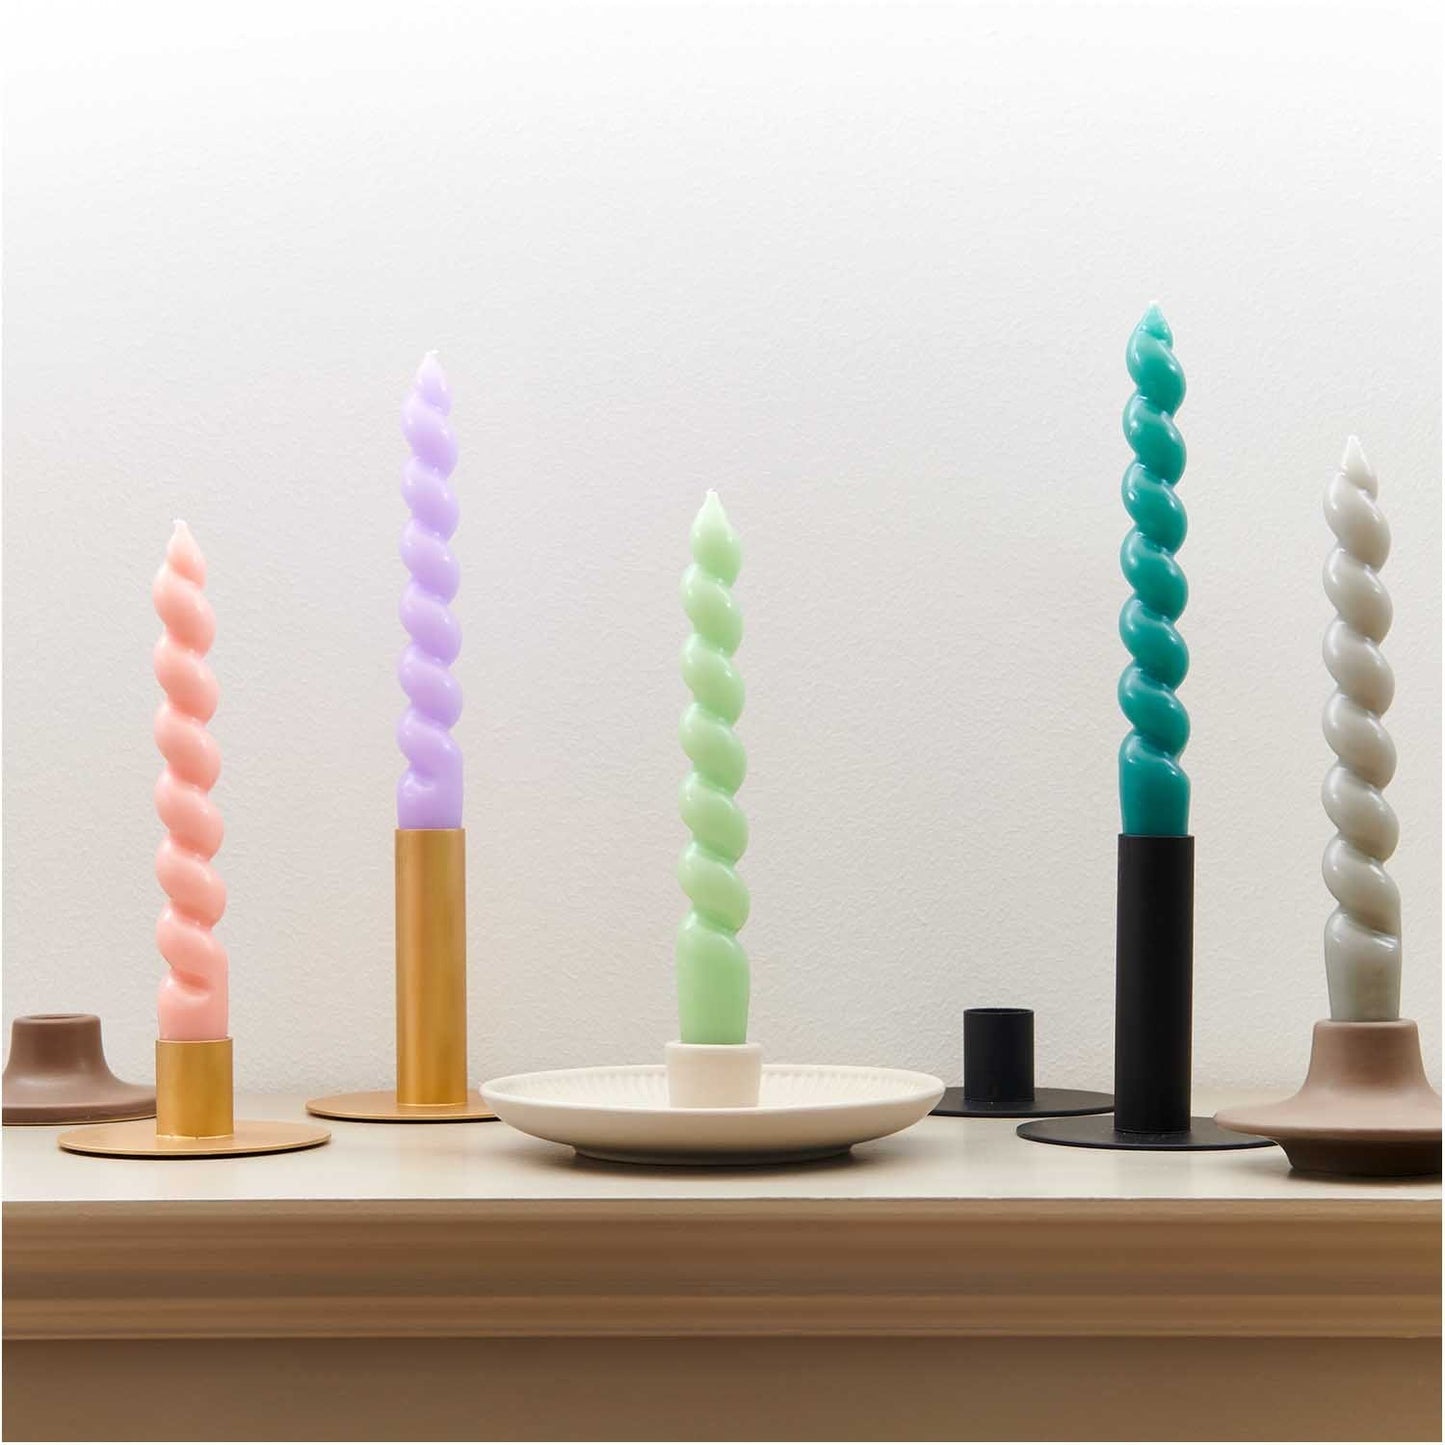 Spiral Candles | Caramel Spiral Candles UK | Pretty Little Party Rico Design